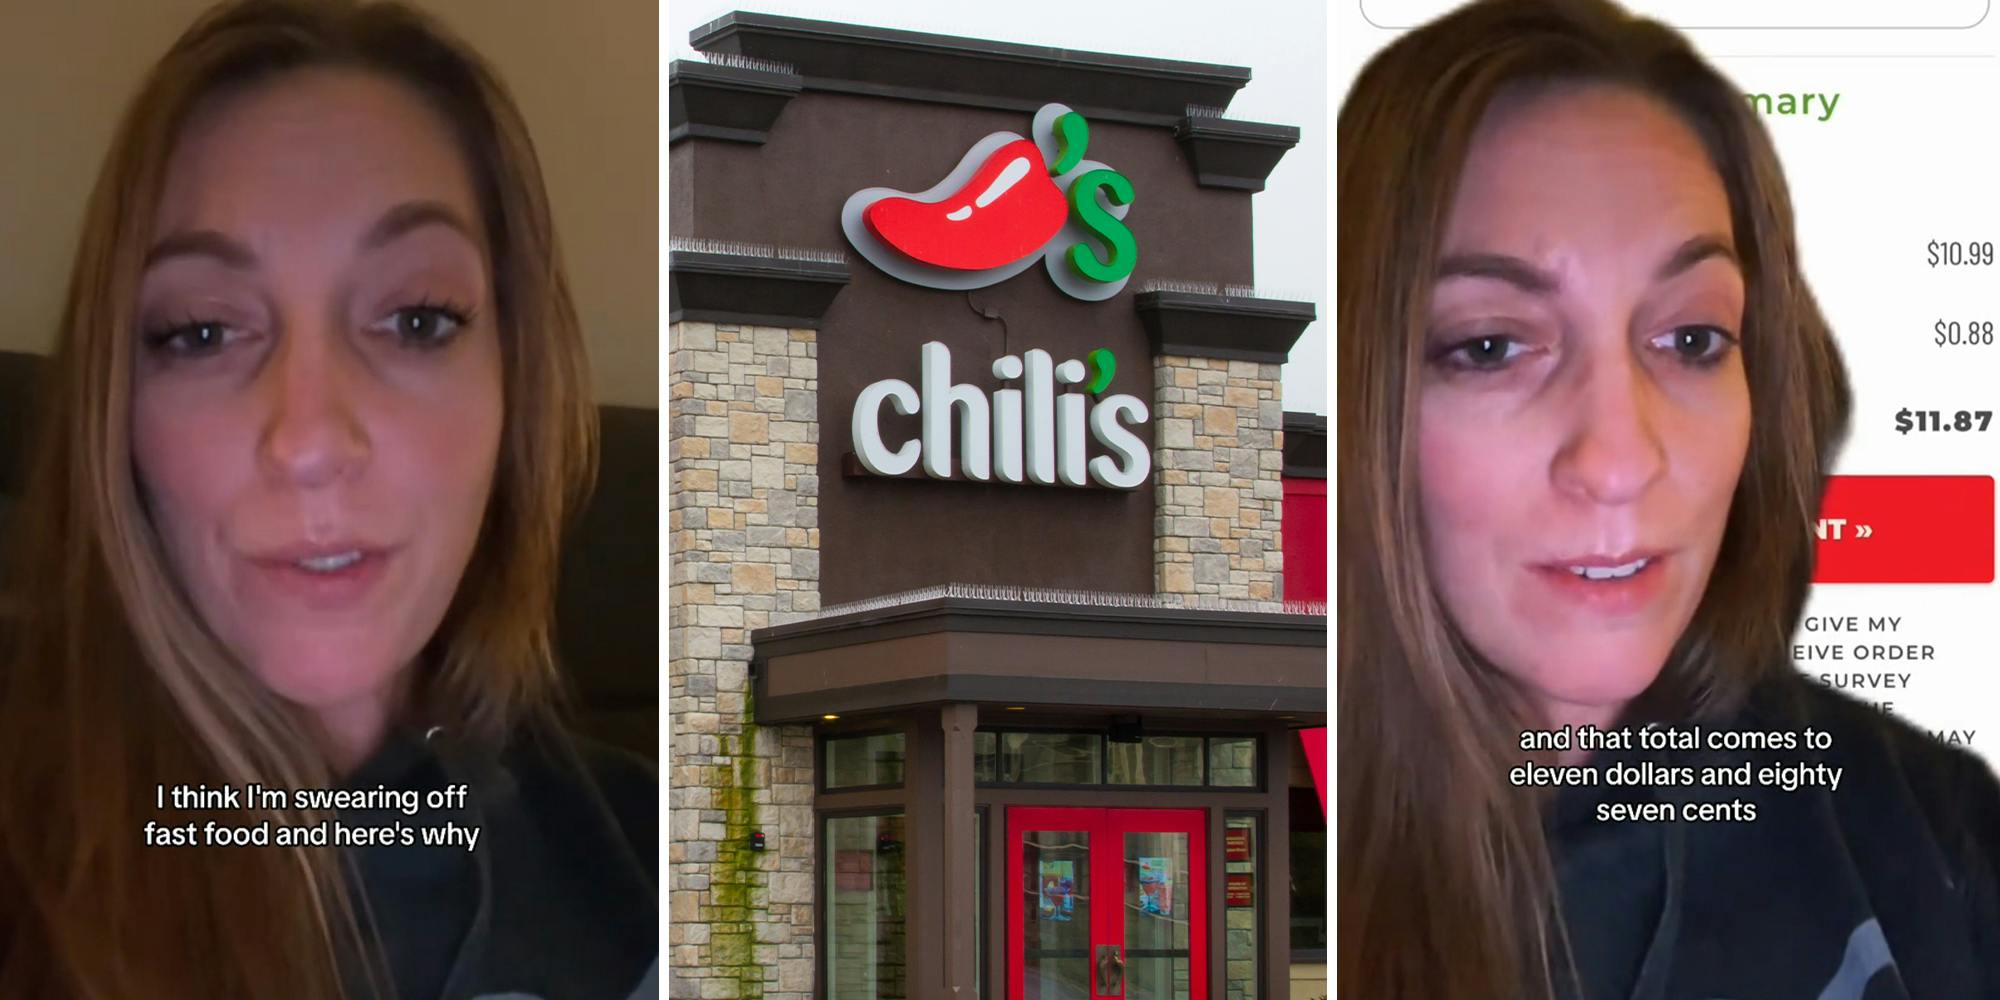 Woman’s meal at McDonald’s costs $12.29. She gets a similar meal at Chili’s for $11.87